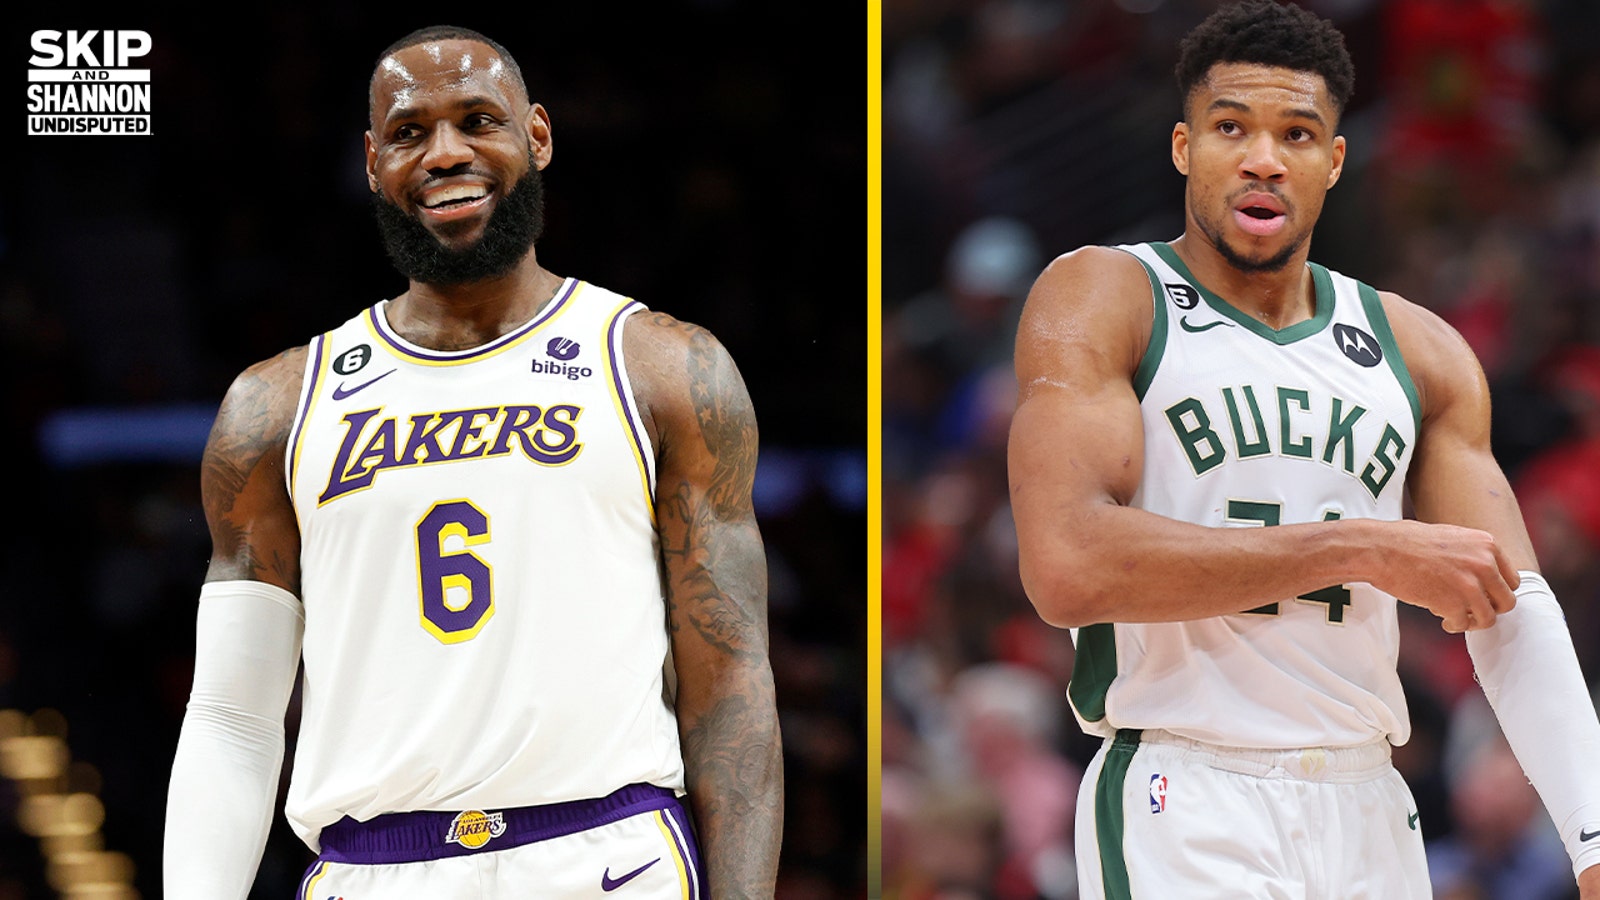 LeBron James and Giannis Antetokounmpo named All-Star starters